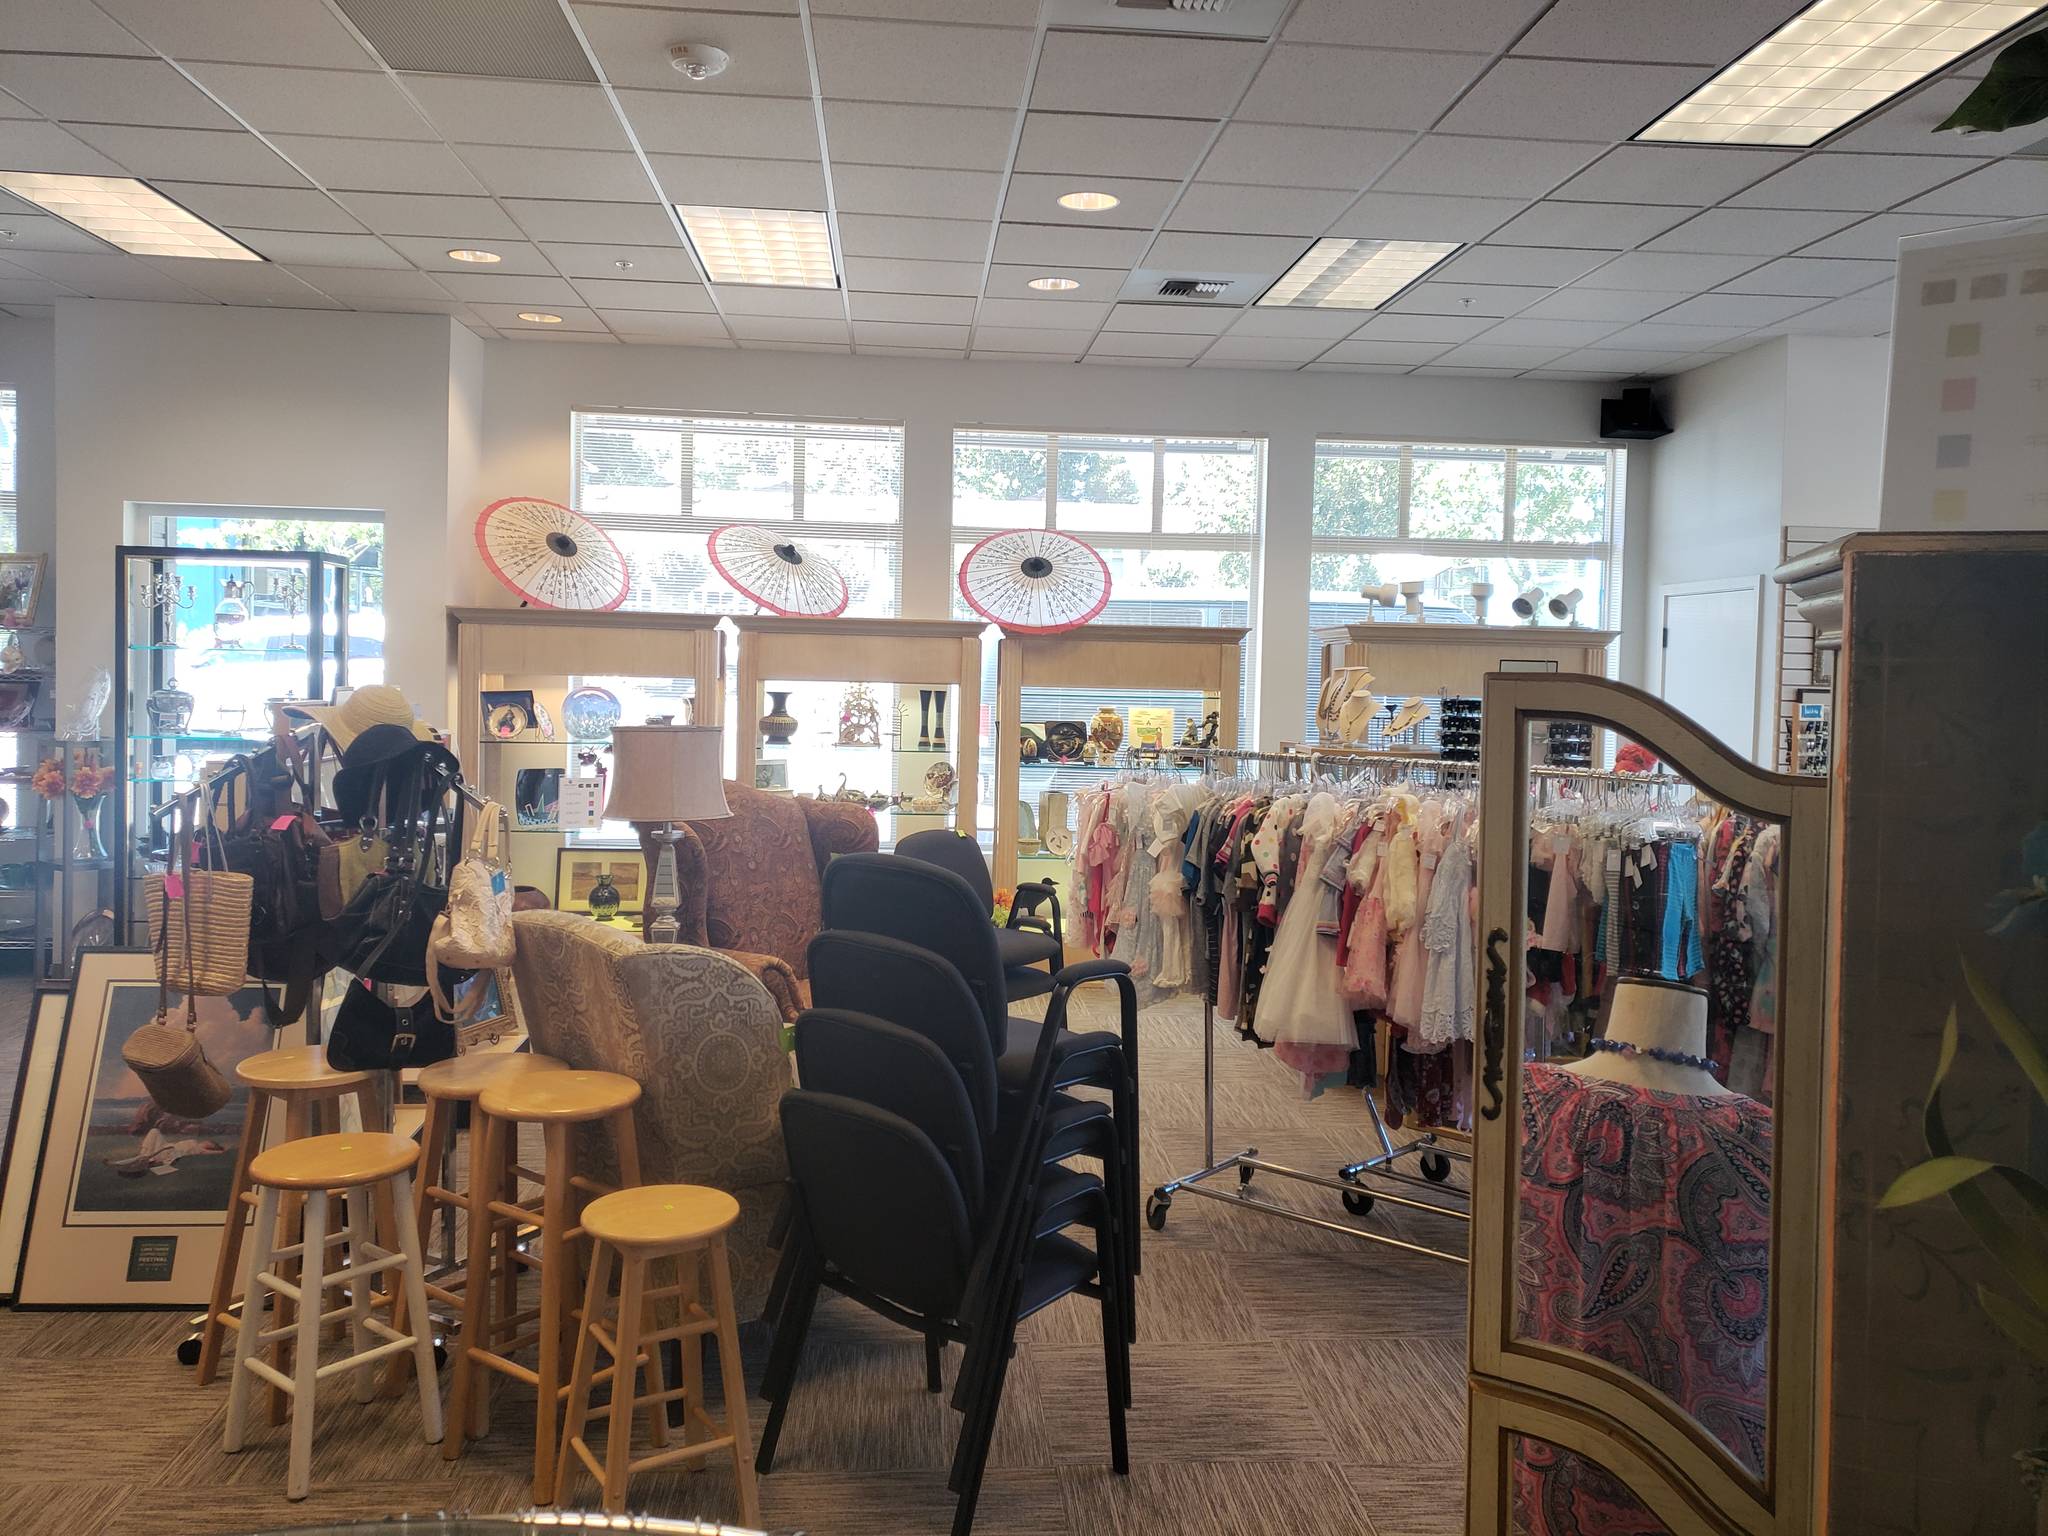 Seattle Children’s Hospital Bargain Boutique making the best of new location